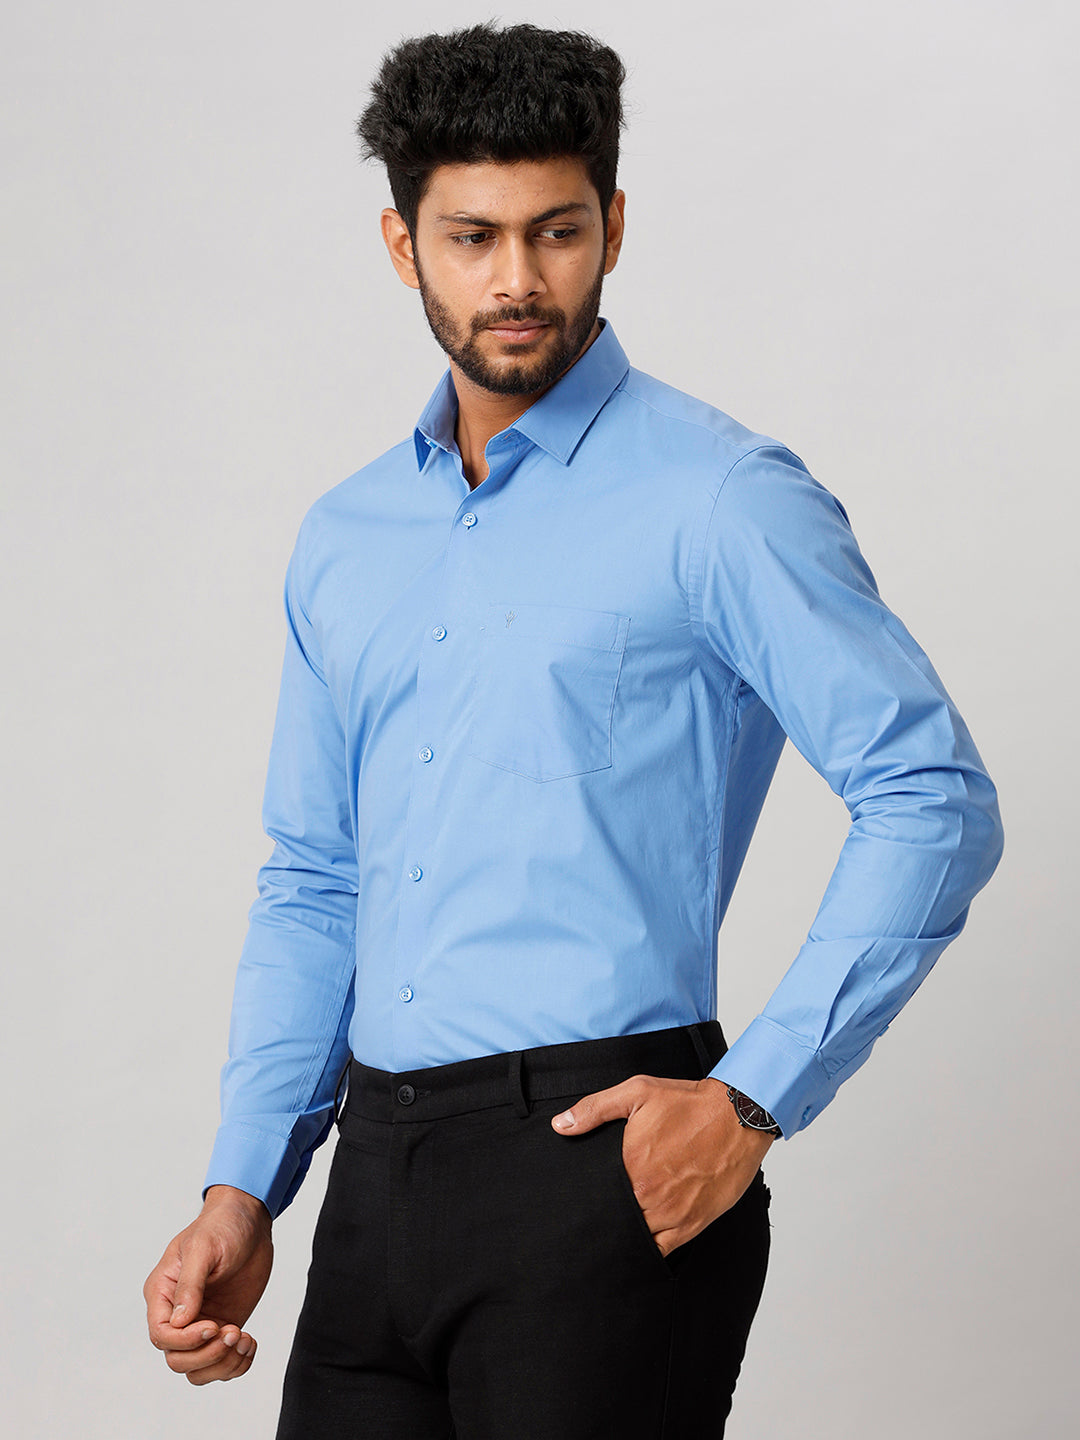 Mens Formal Cotton Spandex 2 Way Stretch Blue Full Sleeves Shirt LY8-Side view